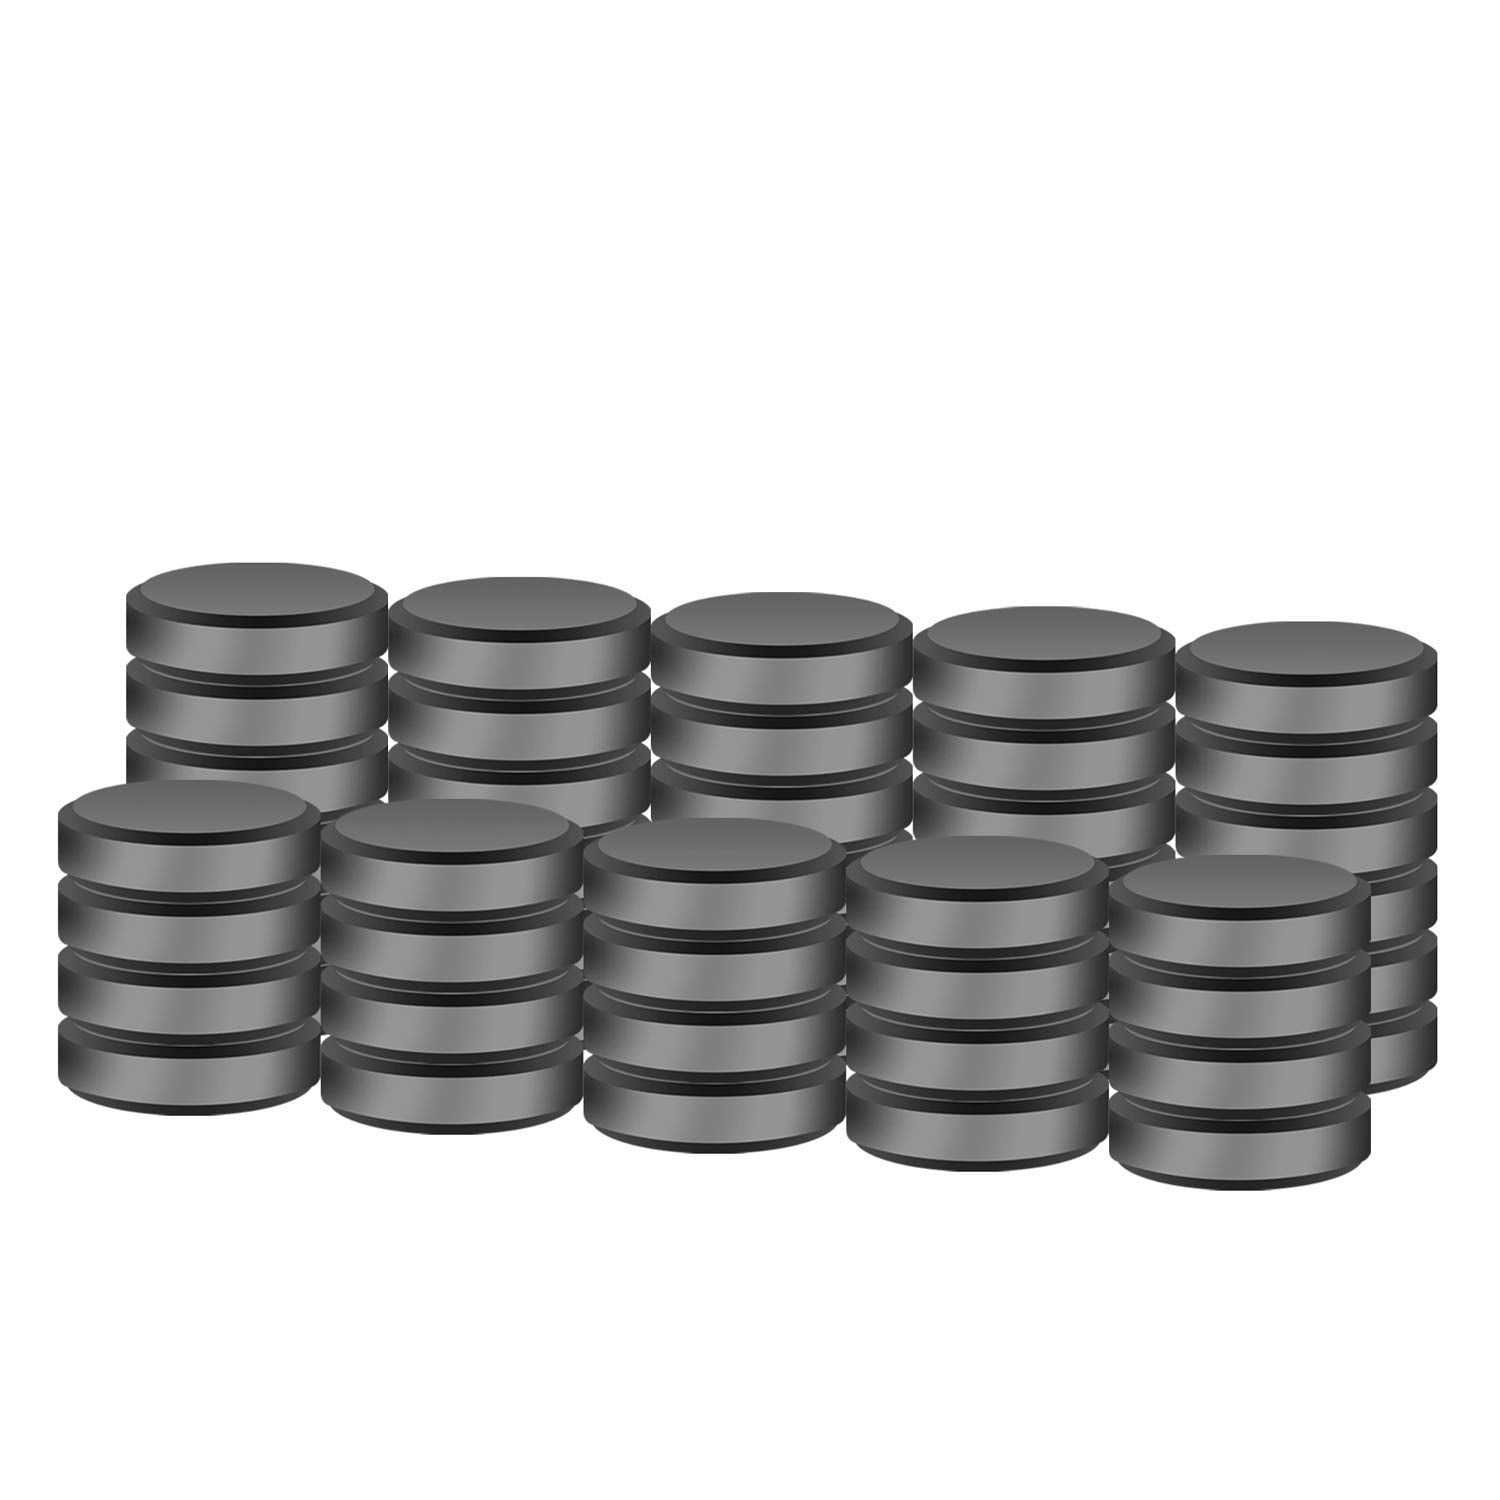 18mm Strong Ferrite Magnets Disc Round Ceramic Magnets for Fridge Craft 